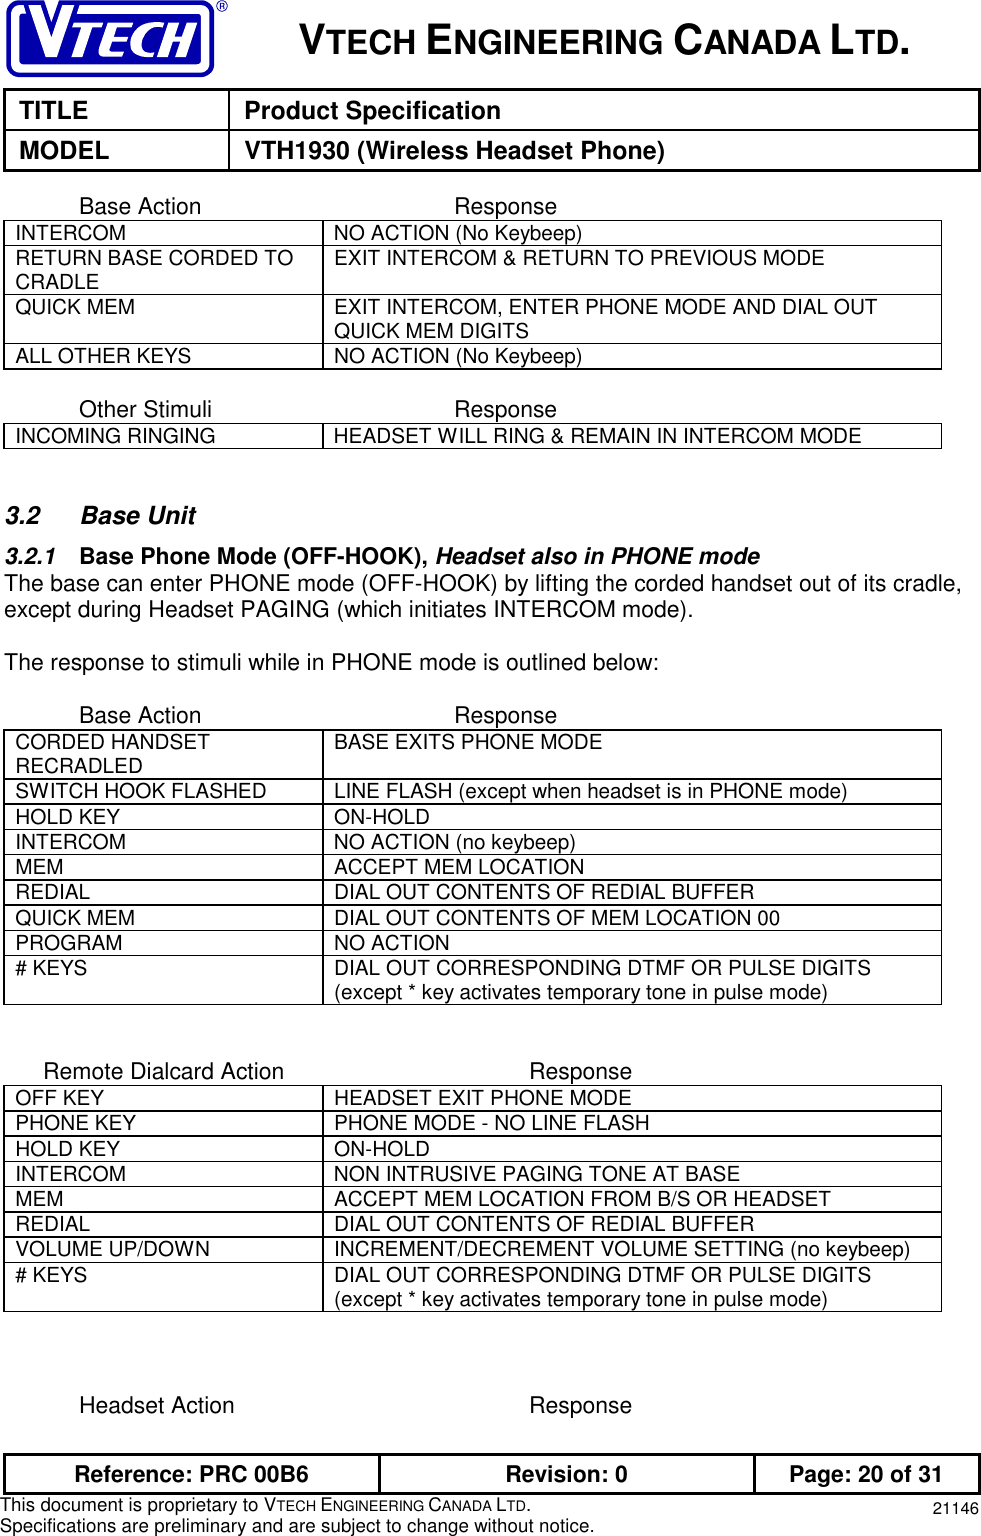 VTECH ENGINEERING CANADA LTD.TITLE Product SpecificationMODEL VTH1930 (Wireless Headset Phone)Reference: PRC 00B6 Revision: 0 Page: 20 of 31This document is proprietary to VTECH ENGINEERING CANADA LTD.Specifications are preliminary and are subject to change without notice. 21146Base Action ResponseINTERCOM NO ACTION (No Keybeep)RETURN BASE CORDED TOCRADLE EXIT INTERCOM &amp; RETURN TO PREVIOUS MODEQUICK MEM EXIT INTERCOM, ENTER PHONE MODE AND DIAL OUTQUICK MEM DIGITSALL OTHER KEYS NO ACTION (No Keybeep)Other Stimuli ResponseINCOMING RINGING HEADSET WILL RING &amp; REMAIN IN INTERCOM MODE3.2 Base Unit3.2.1  Base Phone Mode (OFF-HOOK), Headset also in PHONE modeThe base can enter PHONE mode (OFF-HOOK) by lifting the corded handset out of its cradle,except during Headset PAGING (which initiates INTERCOM mode).The response to stimuli while in PHONE mode is outlined below:Base Action ResponseCORDED HANDSETRECRADLED BASE EXITS PHONE MODESWITCH HOOK FLASHED LINE FLASH (except when headset is in PHONE mode)HOLD KEY ON-HOLDINTERCOM NO ACTION (no keybeep)MEM ACCEPT MEM LOCATIONREDIAL DIAL OUT CONTENTS OF REDIAL BUFFERQUICK MEM DIAL OUT CONTENTS OF MEM LOCATION 00PROGRAM NO ACTION# KEYS DIAL OUT CORRESPONDING DTMF OR PULSE DIGITS(except * key activates temporary tone in pulse mode)      Remote Dialcard Action ResponseOFF KEY HEADSET EXIT PHONE MODEPHONE KEY PHONE MODE - NO LINE FLASHHOLD KEY ON-HOLDINTERCOM NON INTRUSIVE PAGING TONE AT BASEMEM ACCEPT MEM LOCATION FROM B/S OR HEADSETREDIAL DIAL OUT CONTENTS OF REDIAL BUFFERVOLUME UP/DOWN INCREMENT/DECREMENT VOLUME SETTING (no keybeep)# KEYS DIAL OUT CORRESPONDING DTMF OR PULSE DIGITS(except * key activates temporary tone in pulse mode)Headset Action Response